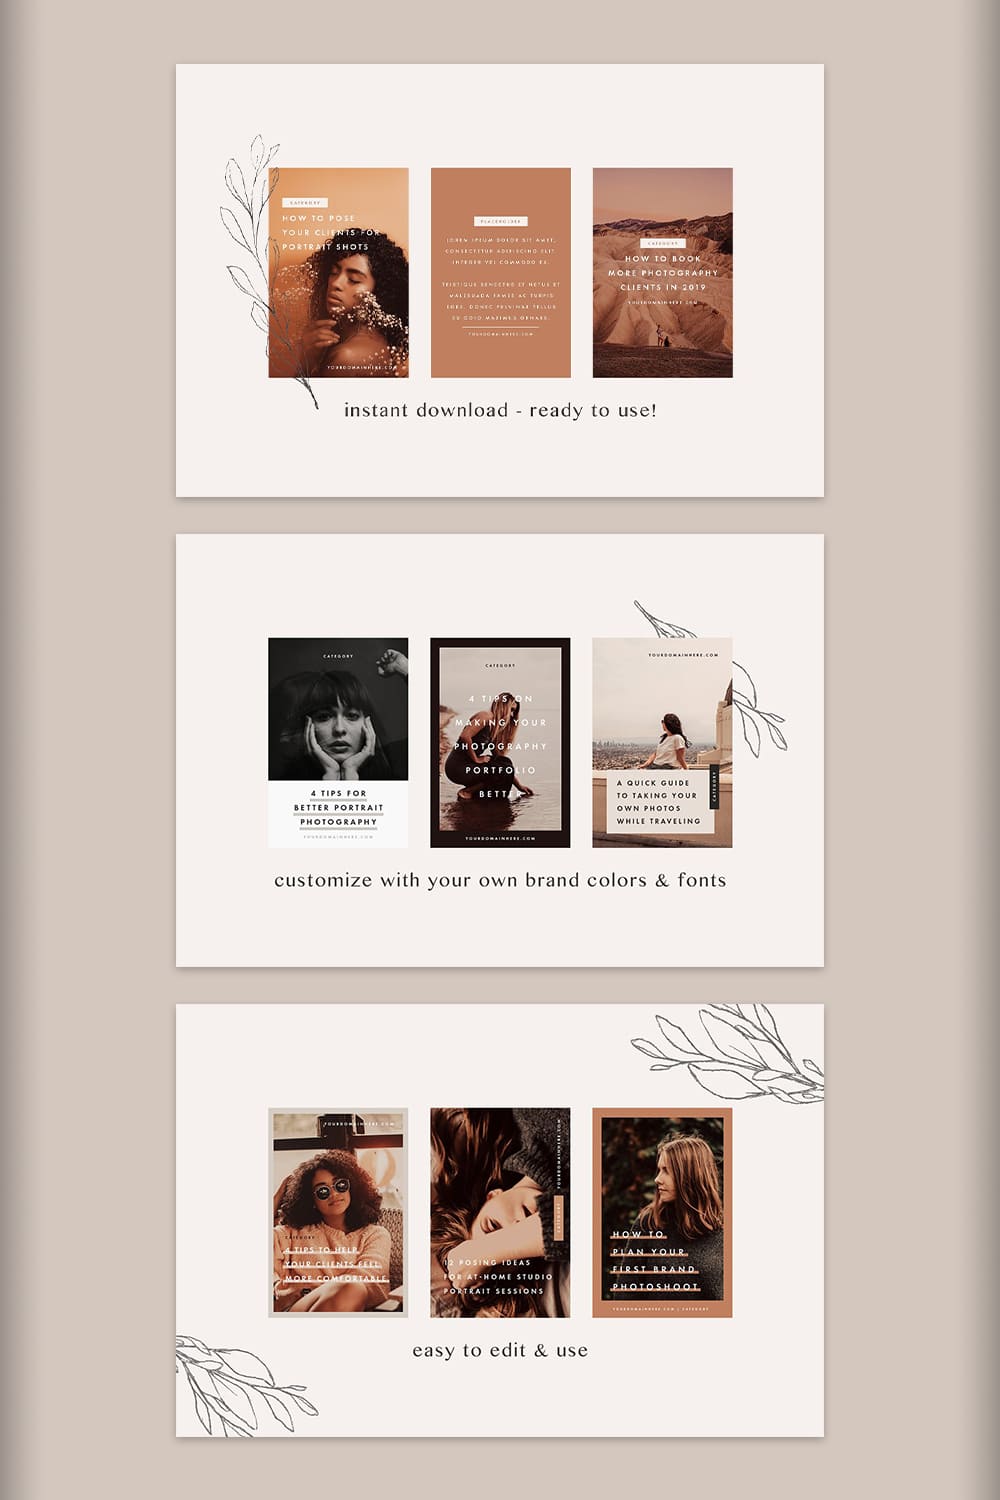 Pinterest Templates -"Customize With Your Own Brand Colors & Fonts".